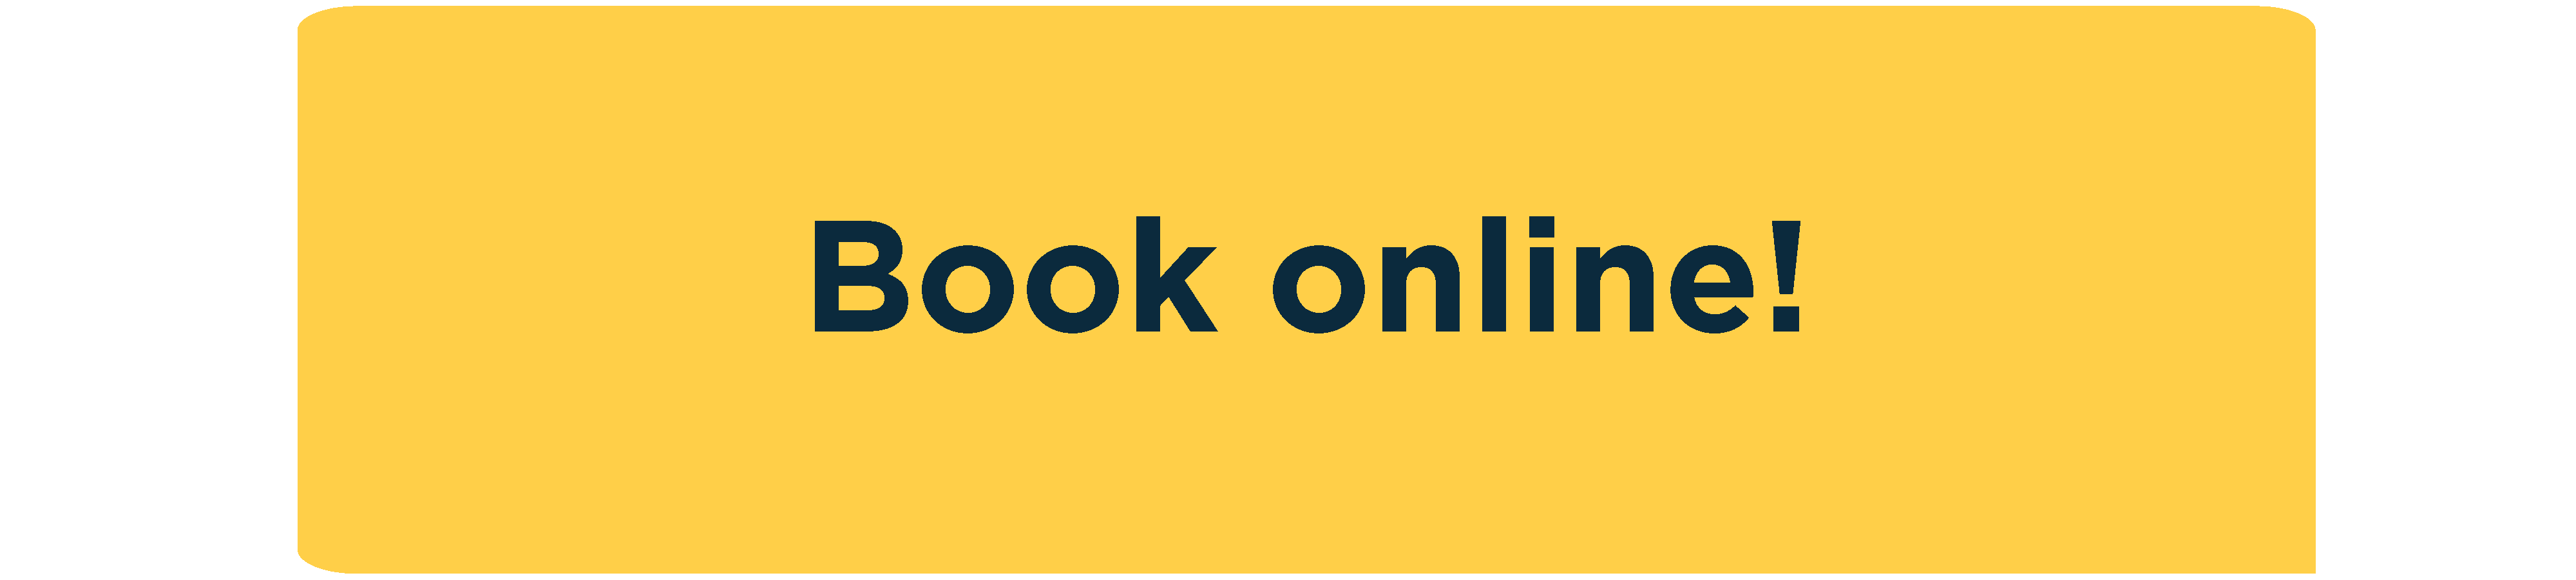 Book online home page